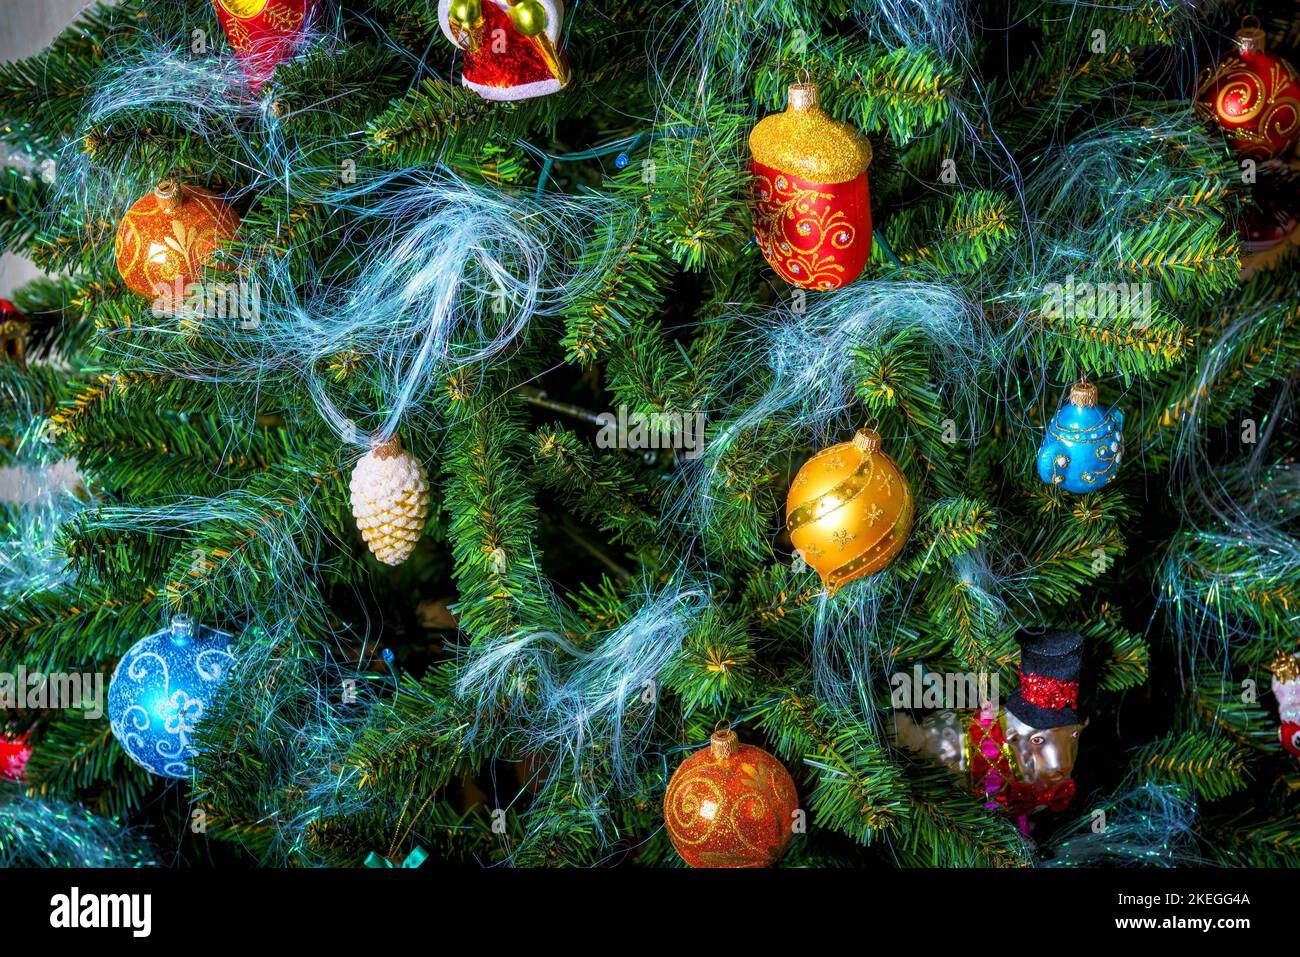 New Year and Christmas decorations hang on xmas tree close-up. Beautiful ornaments, bright festive baubles on background of green fir branches. Theme Stock Photo